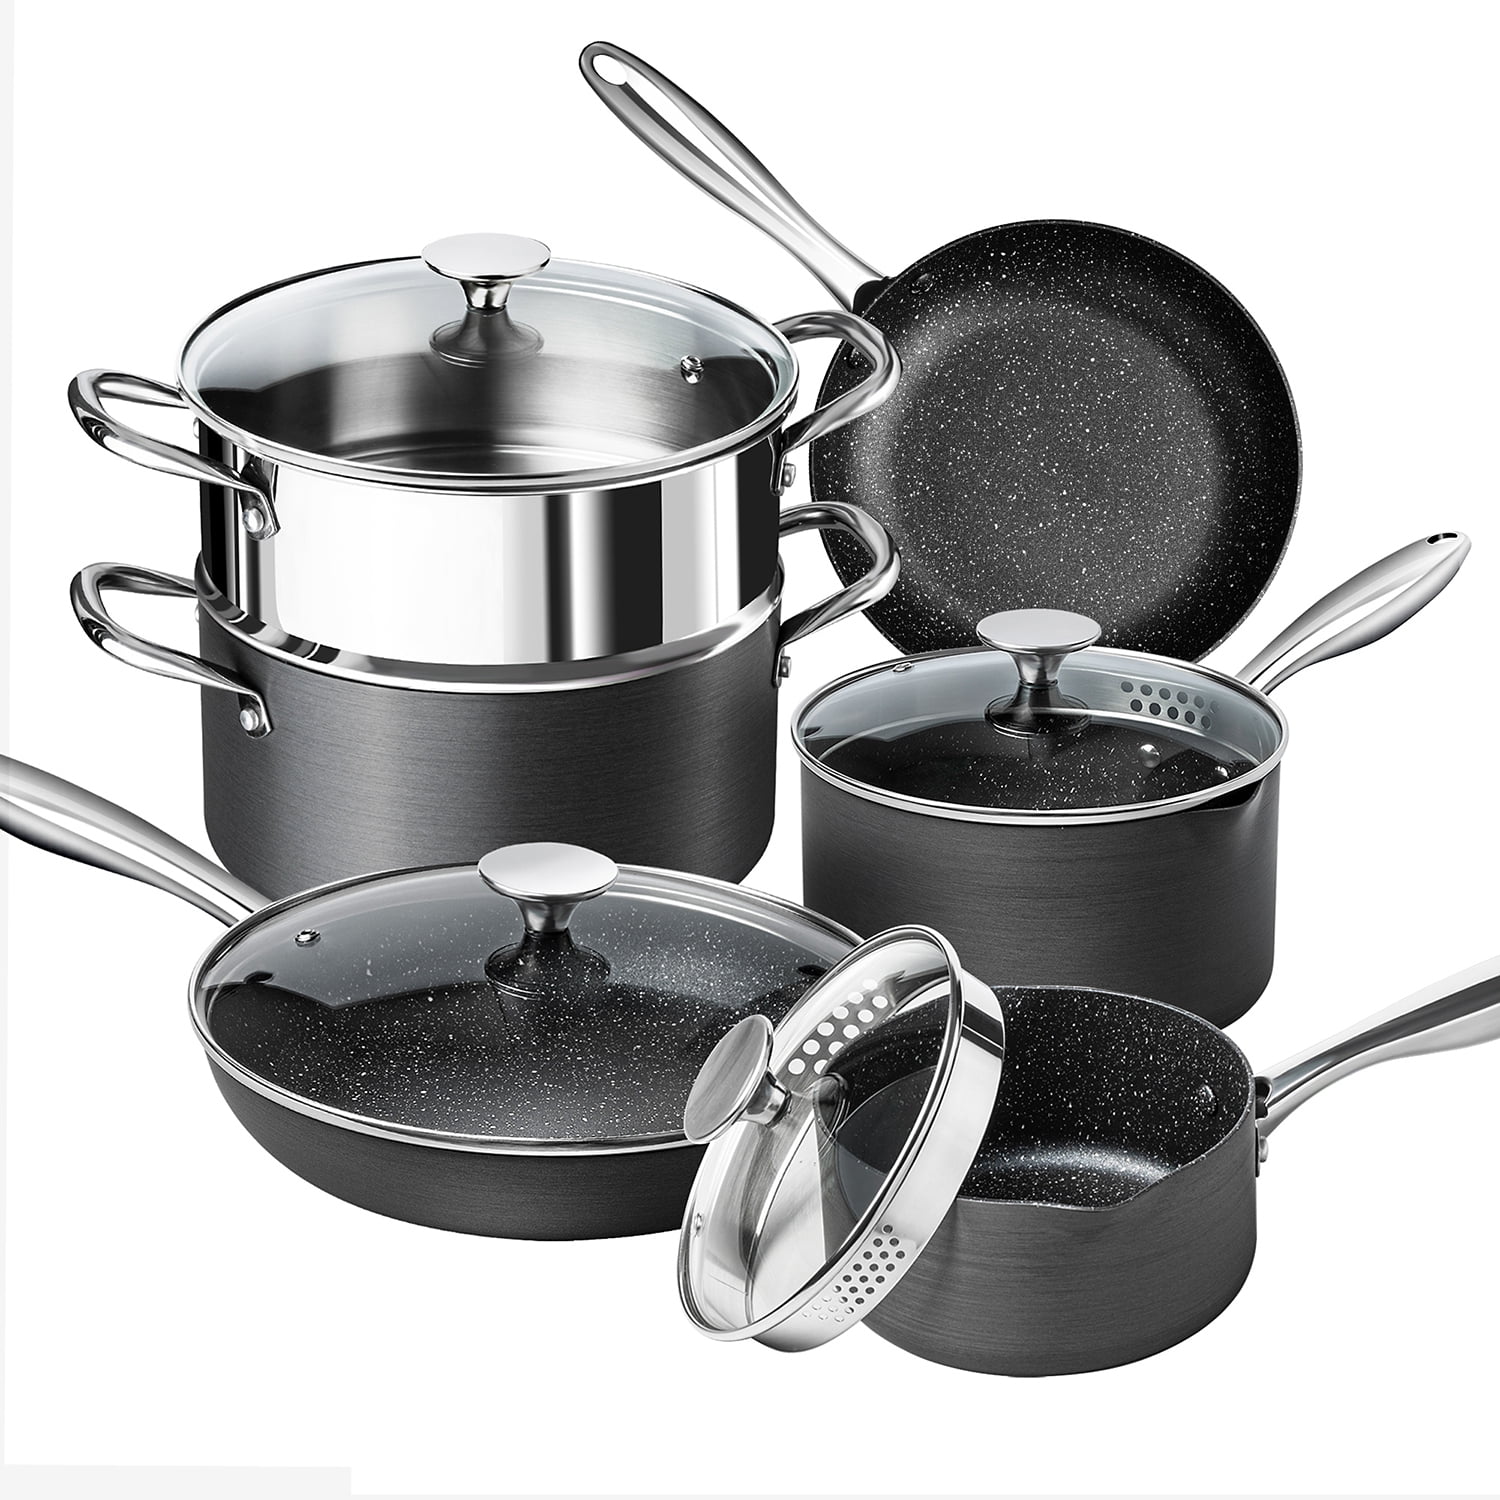 MICHELANGELO Pots and Pans Set 22 Piece, Nonstick Kitchen Cookware Sets  with Stone-Derived Coating, Nonstick Pots and Pans Set, Stone Cookware Set